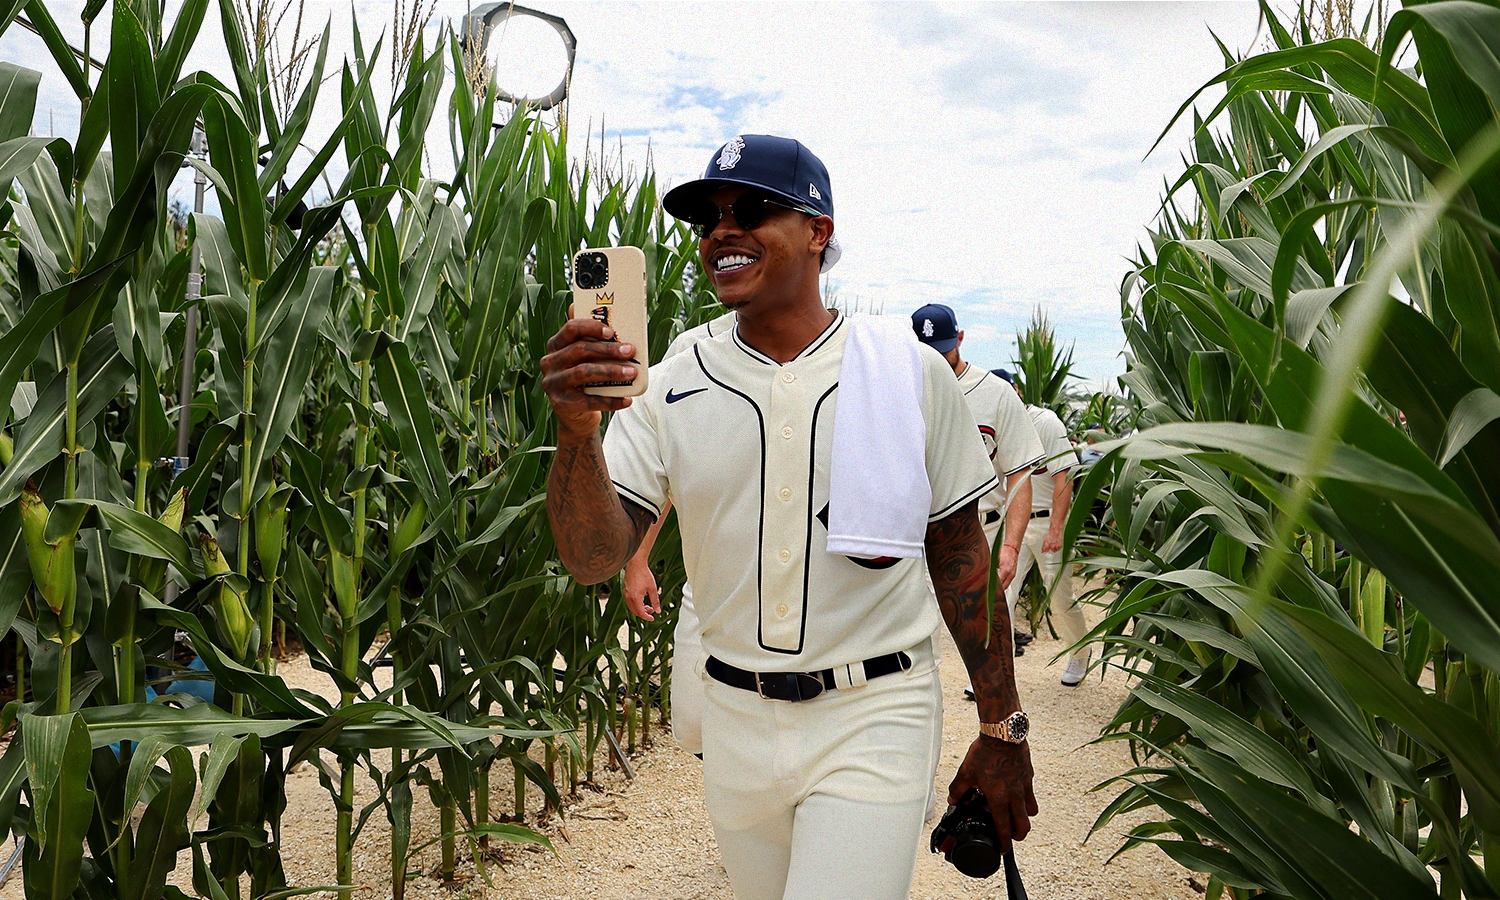 MLB's 'Field of Dreams' game: Is this Hybrid Heaven?